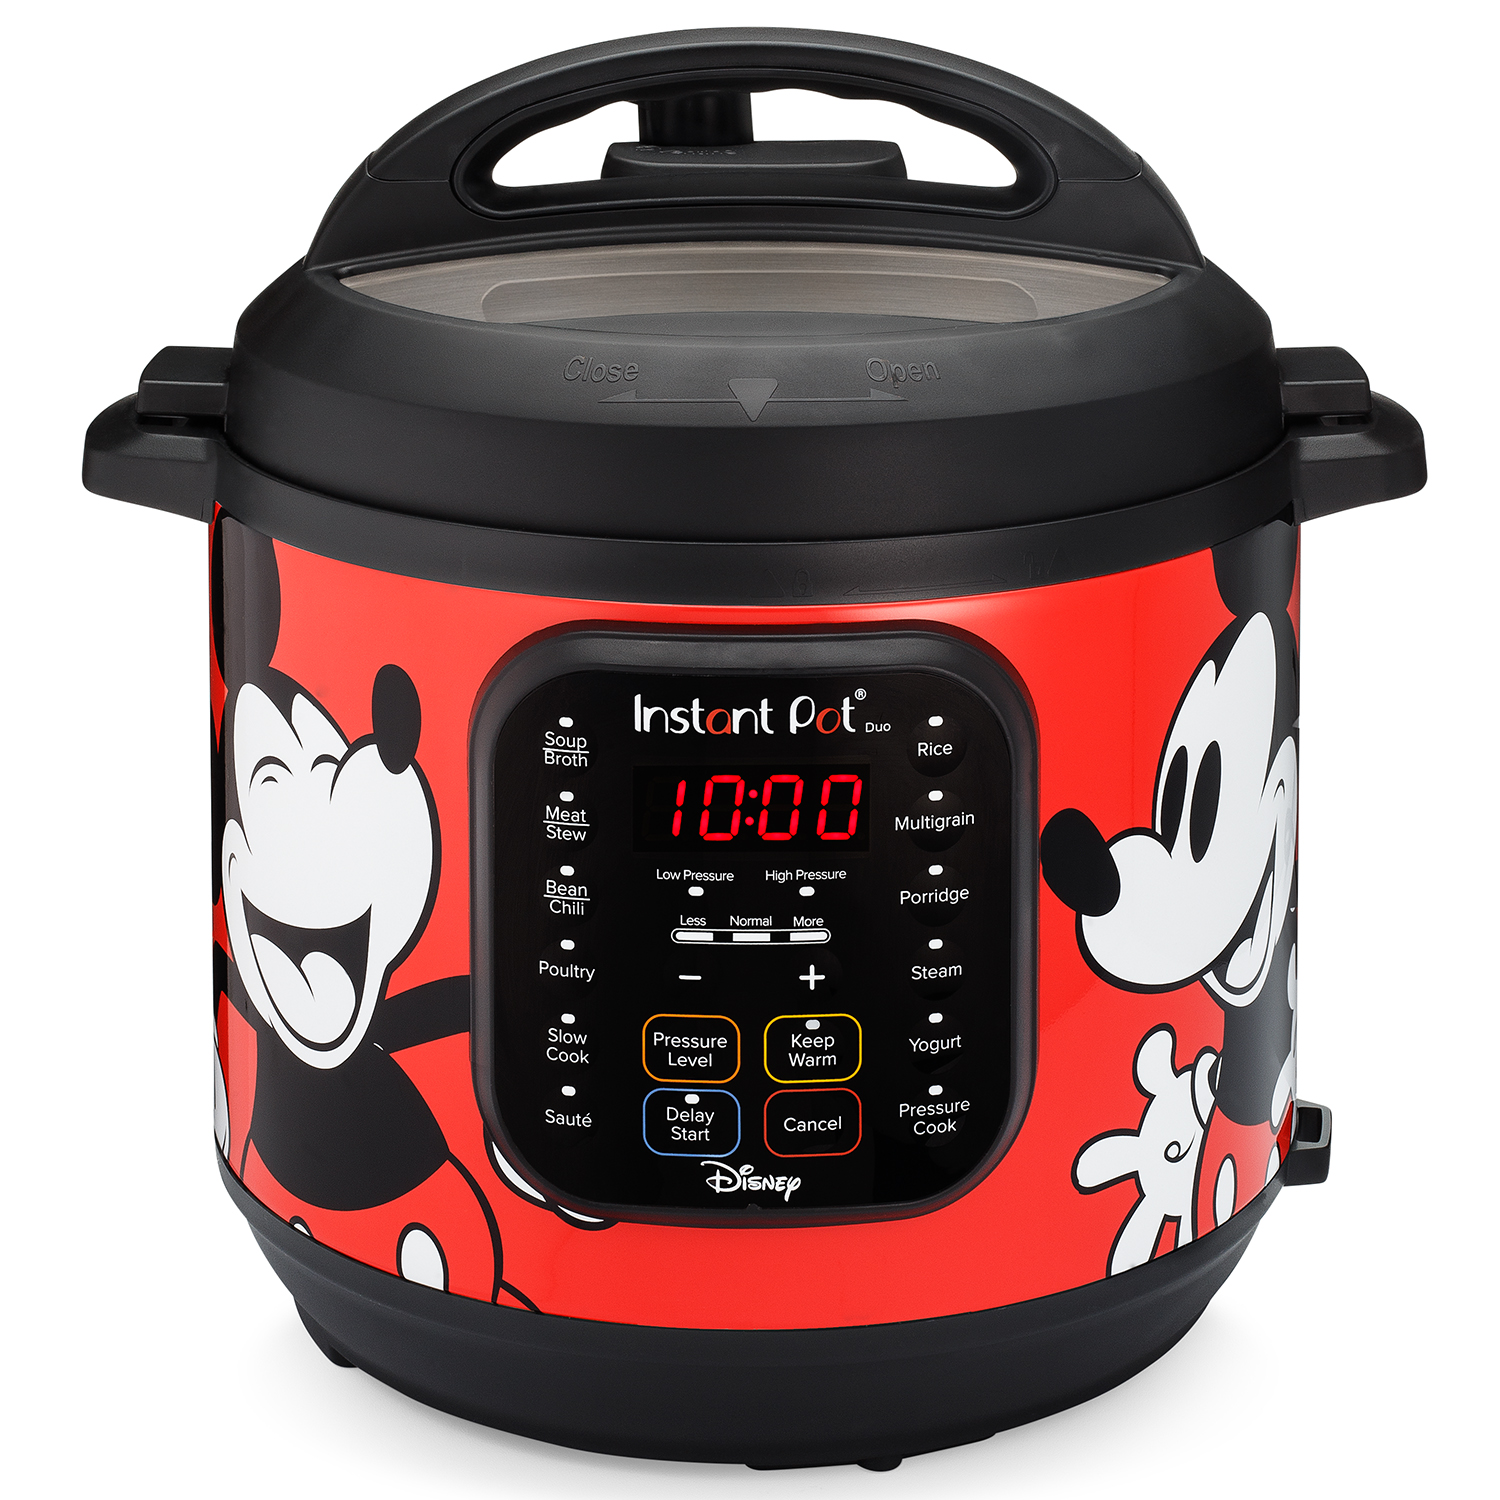 Instant Pot, 6-Quart Duo Electric Pressure Cooker, 7-in-1 Yogurt Maker, Food Steamer, Slow Cooker, Rice Cooker & More, Disney Mickey Mouse, Red - image 1 of 2